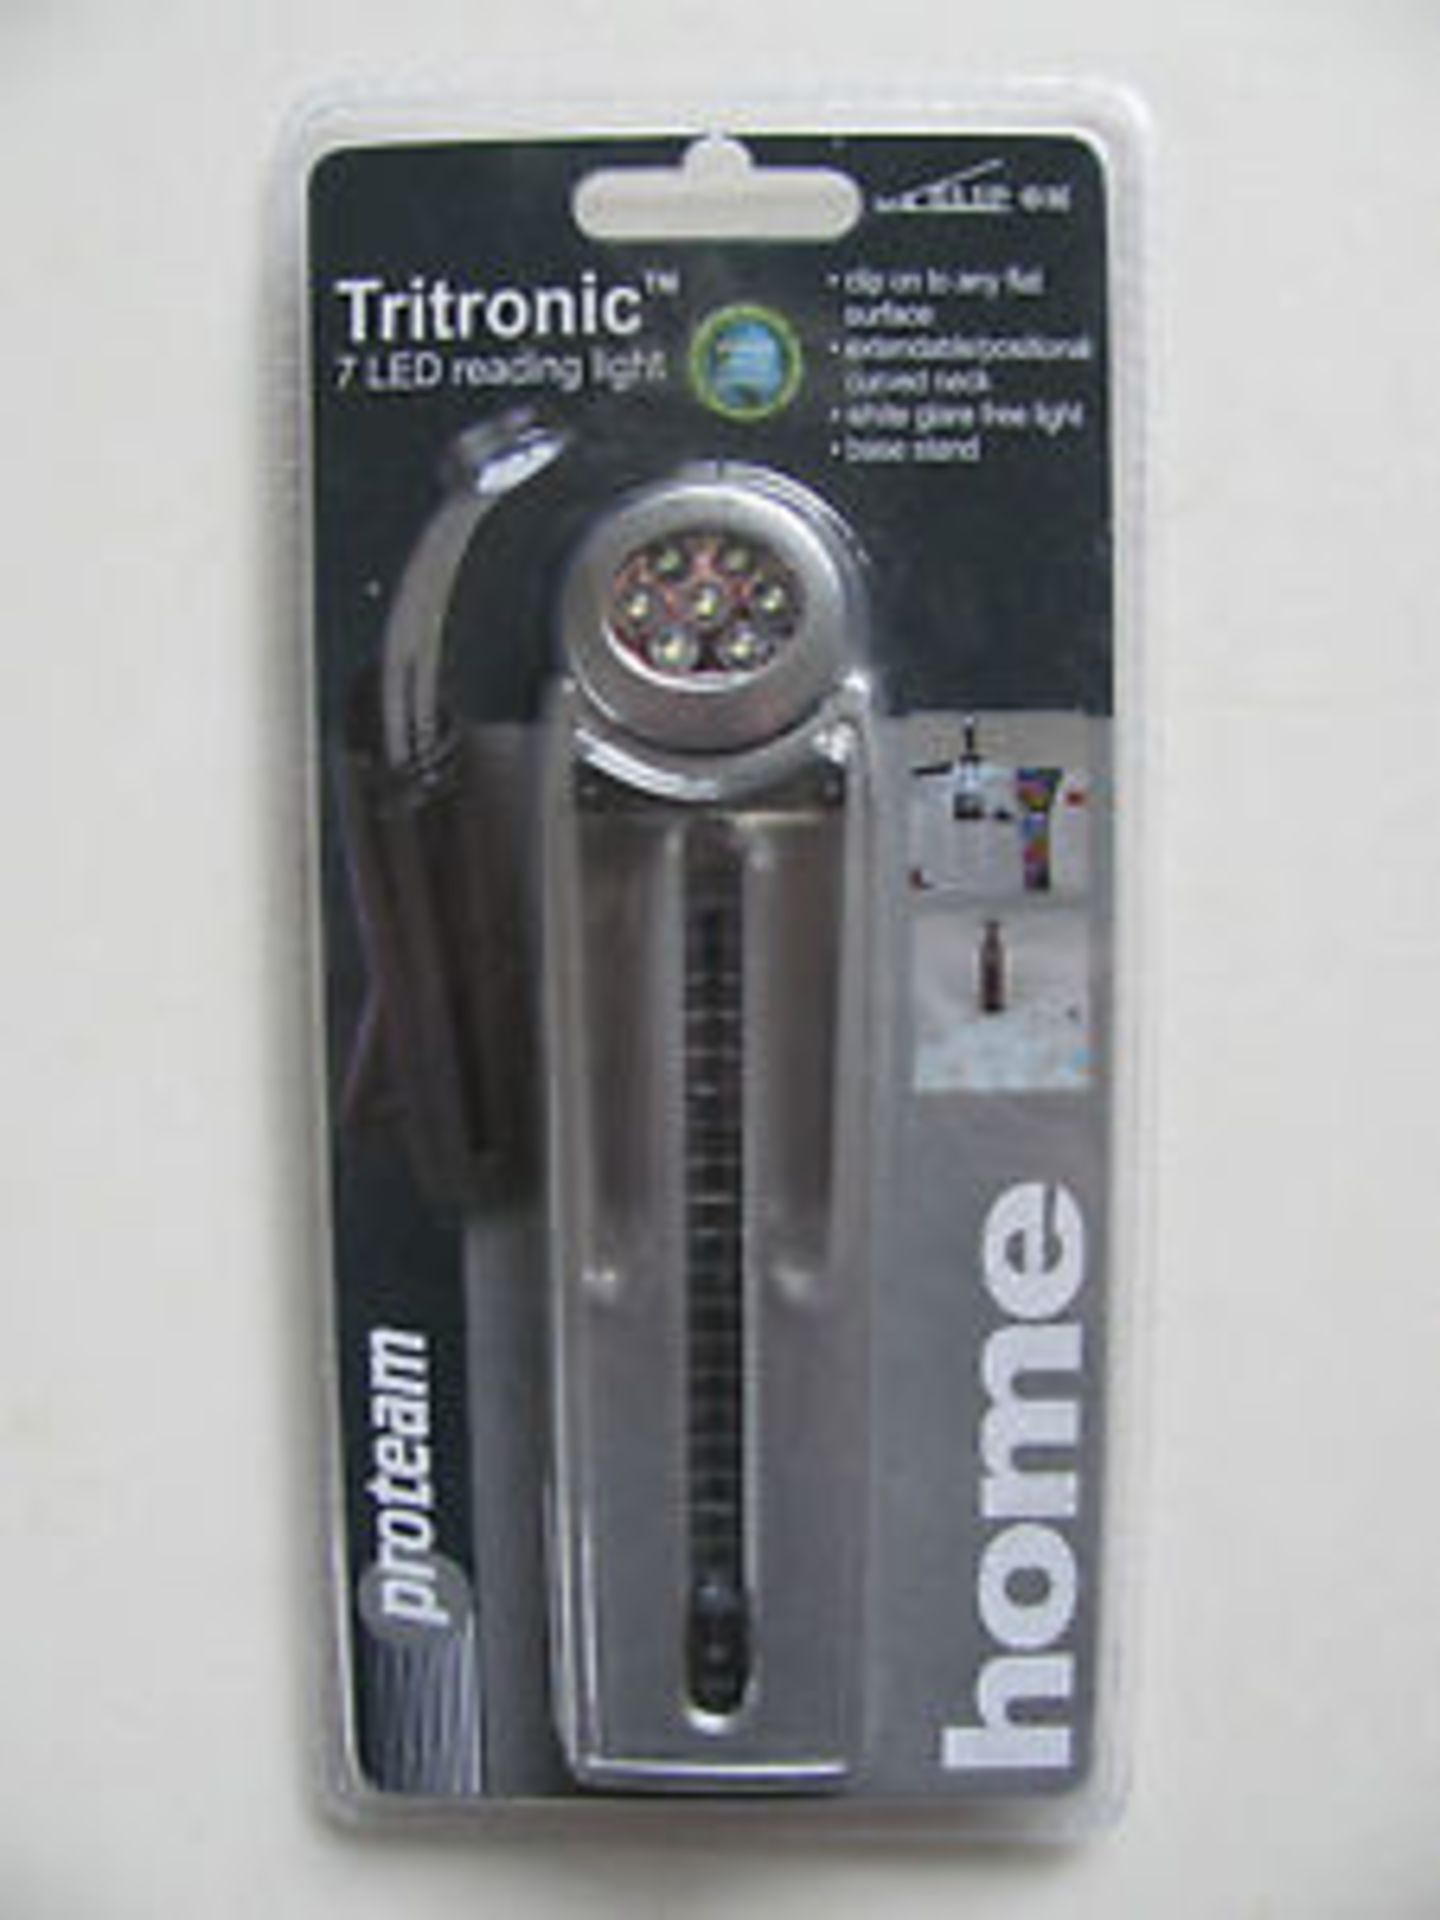 V *TRADE QTY* Brand New Tritronic 7 LED Reading Light With Clip & Stand X 5 YOUR BID PRICE TO BE